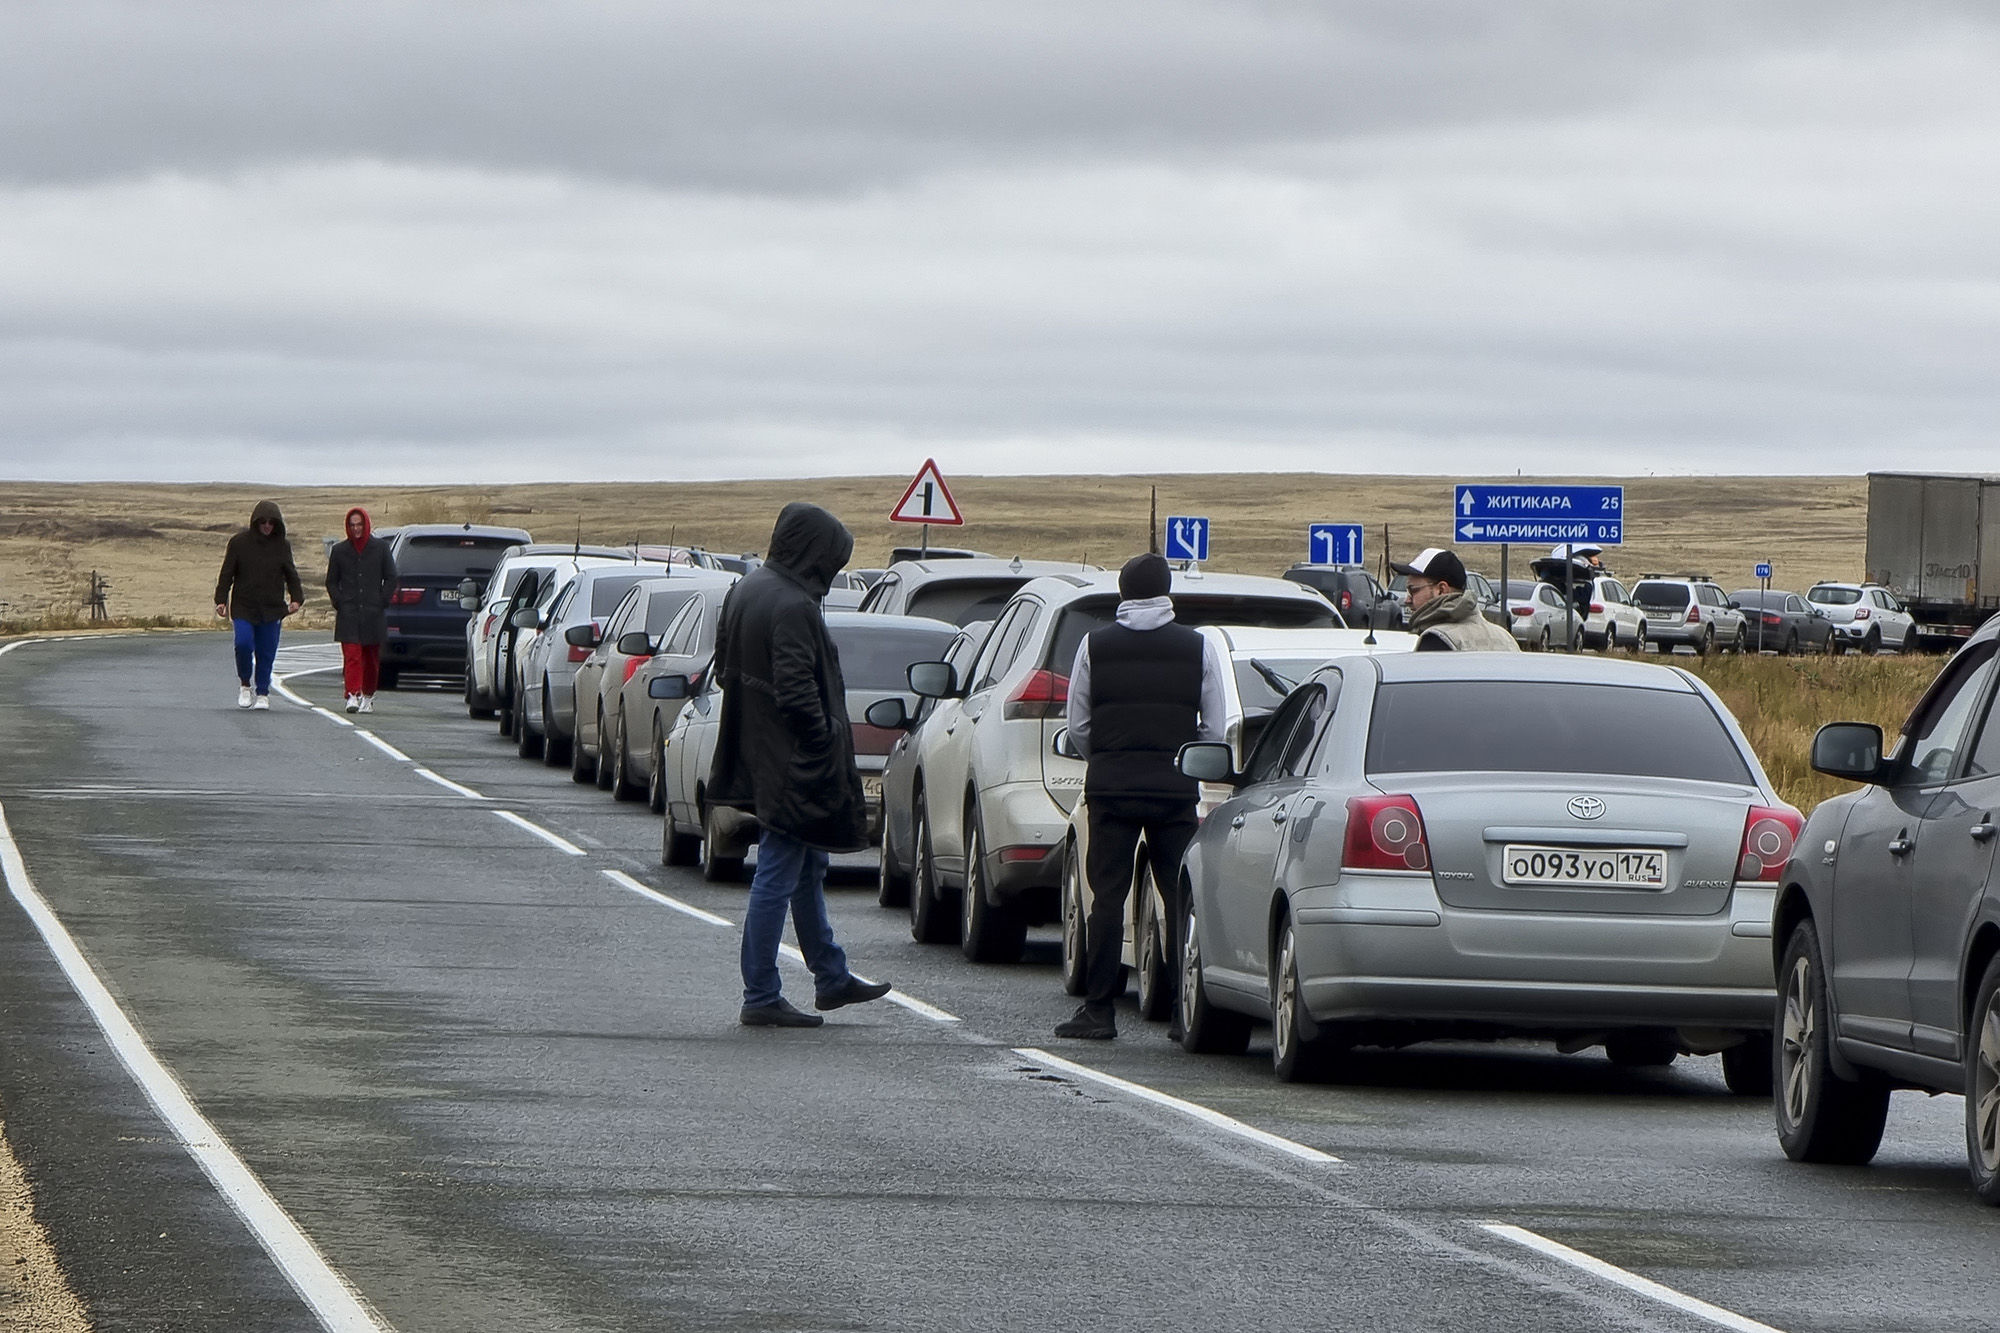 People walk next to their cars while queuing to cross the border into Kazakhstan at the Mariinsky border crossing, Russia, on September 27